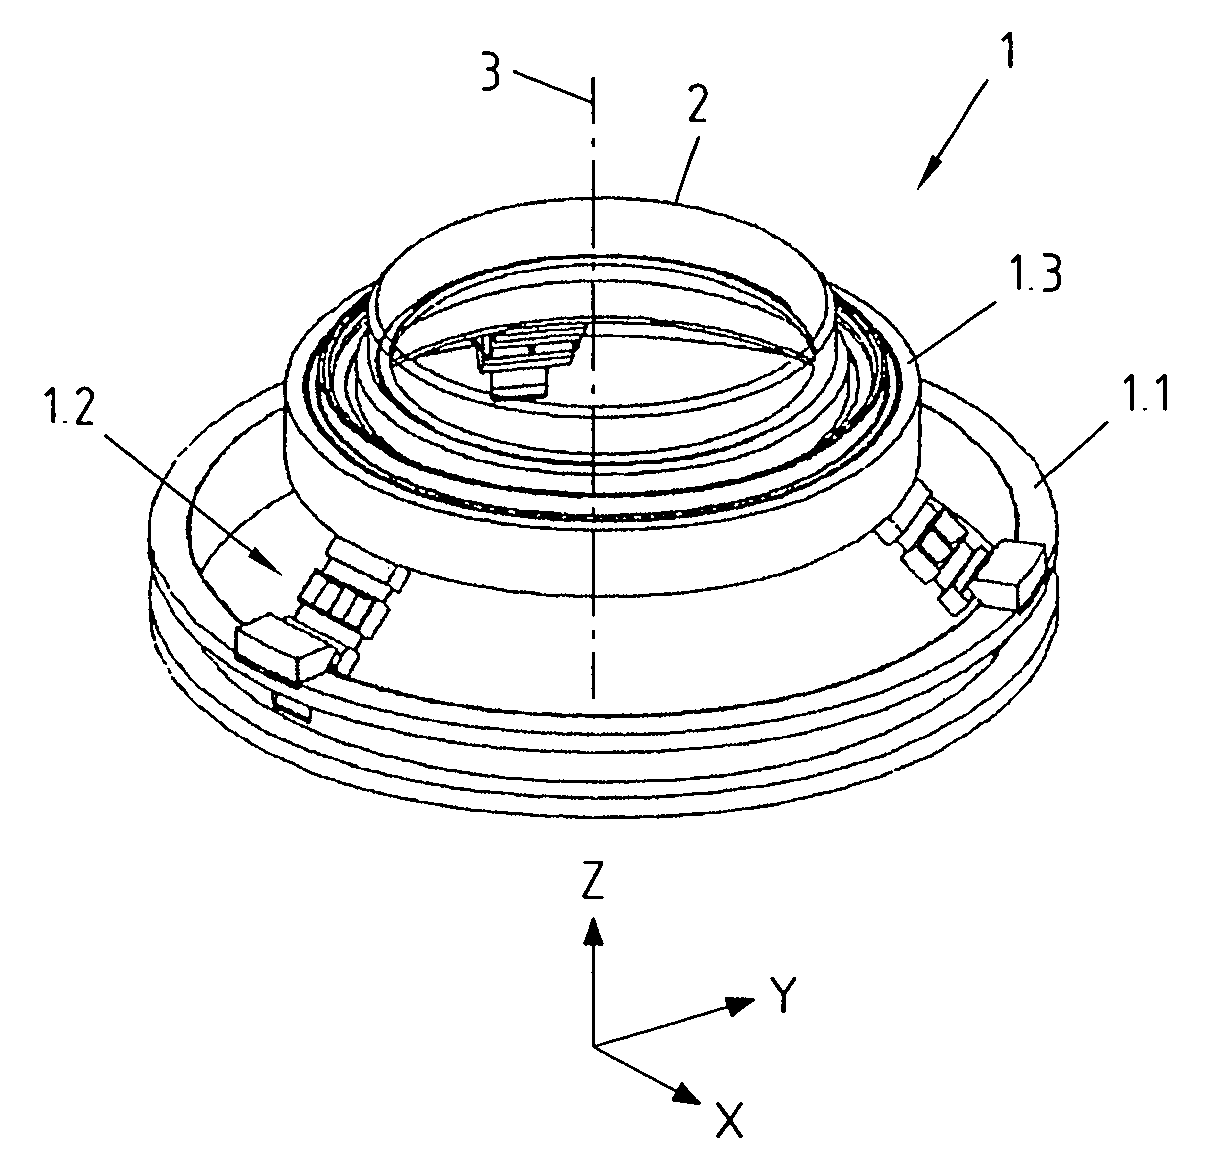 Support device for positioning an optical element